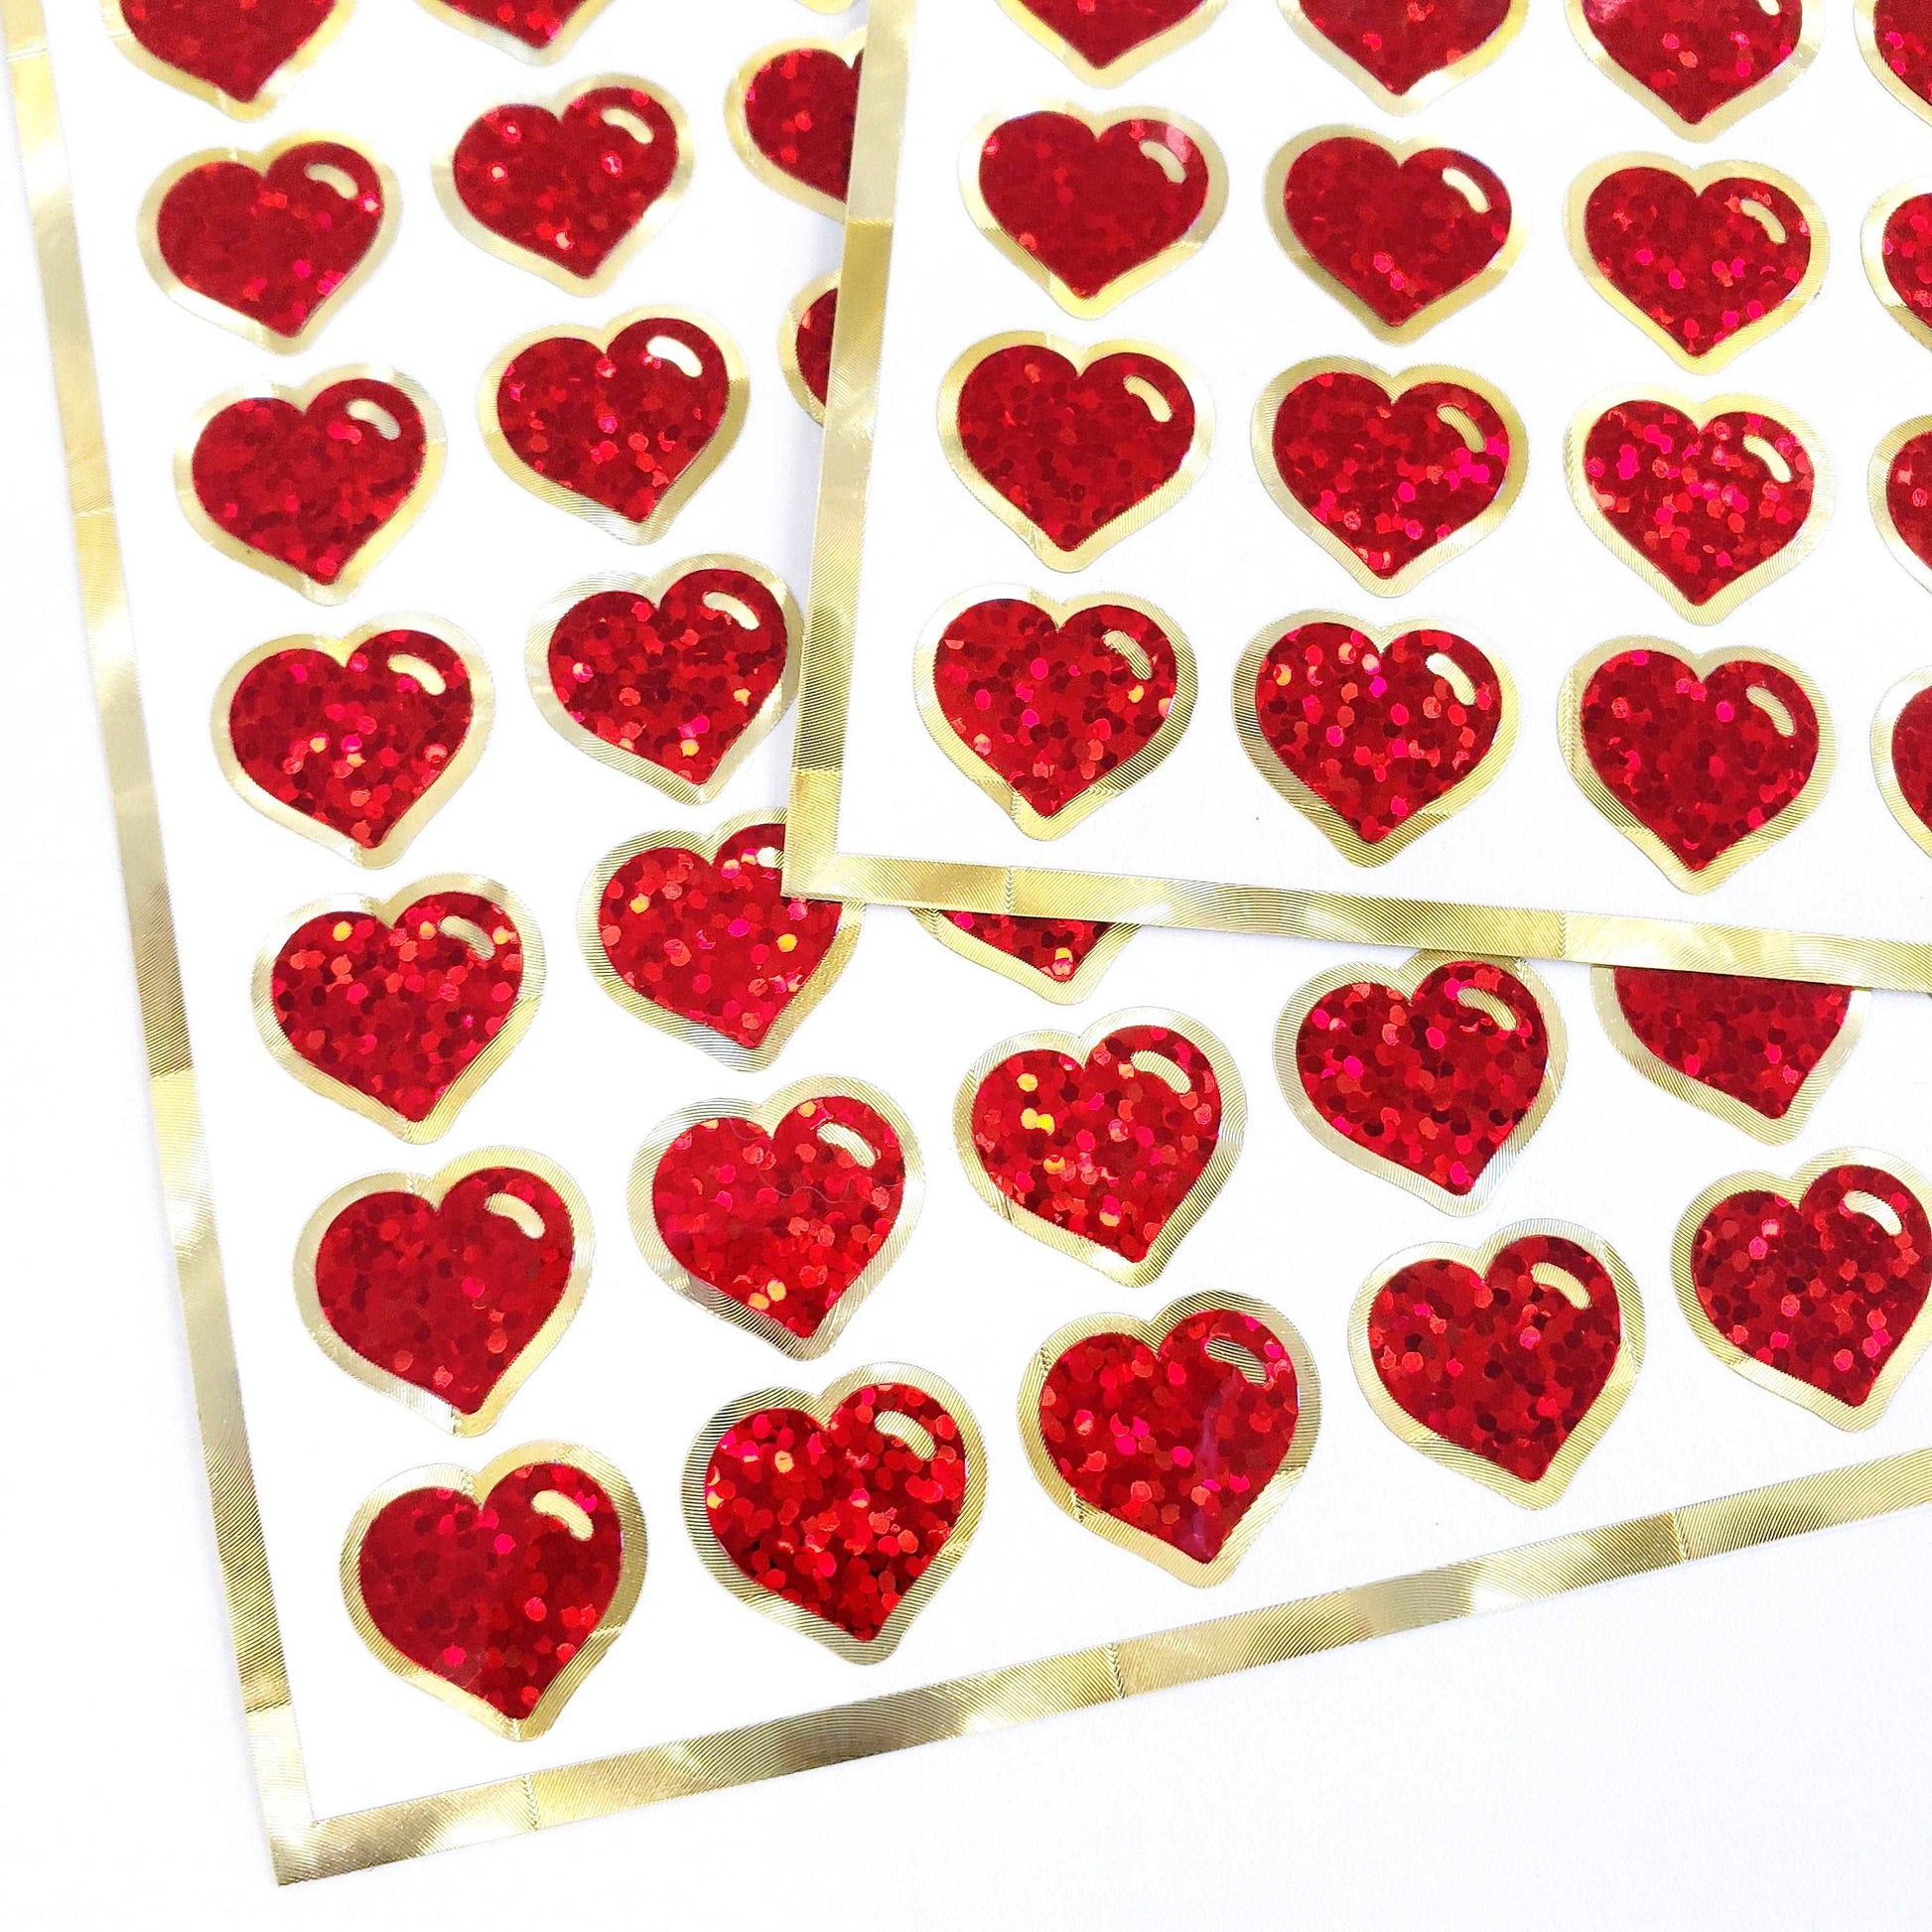 Red and Gold Hearts Sticker Sheet, set of 60 small red heart stickers for planners, charts, journals, love notes, envelopes and scrapbooks.